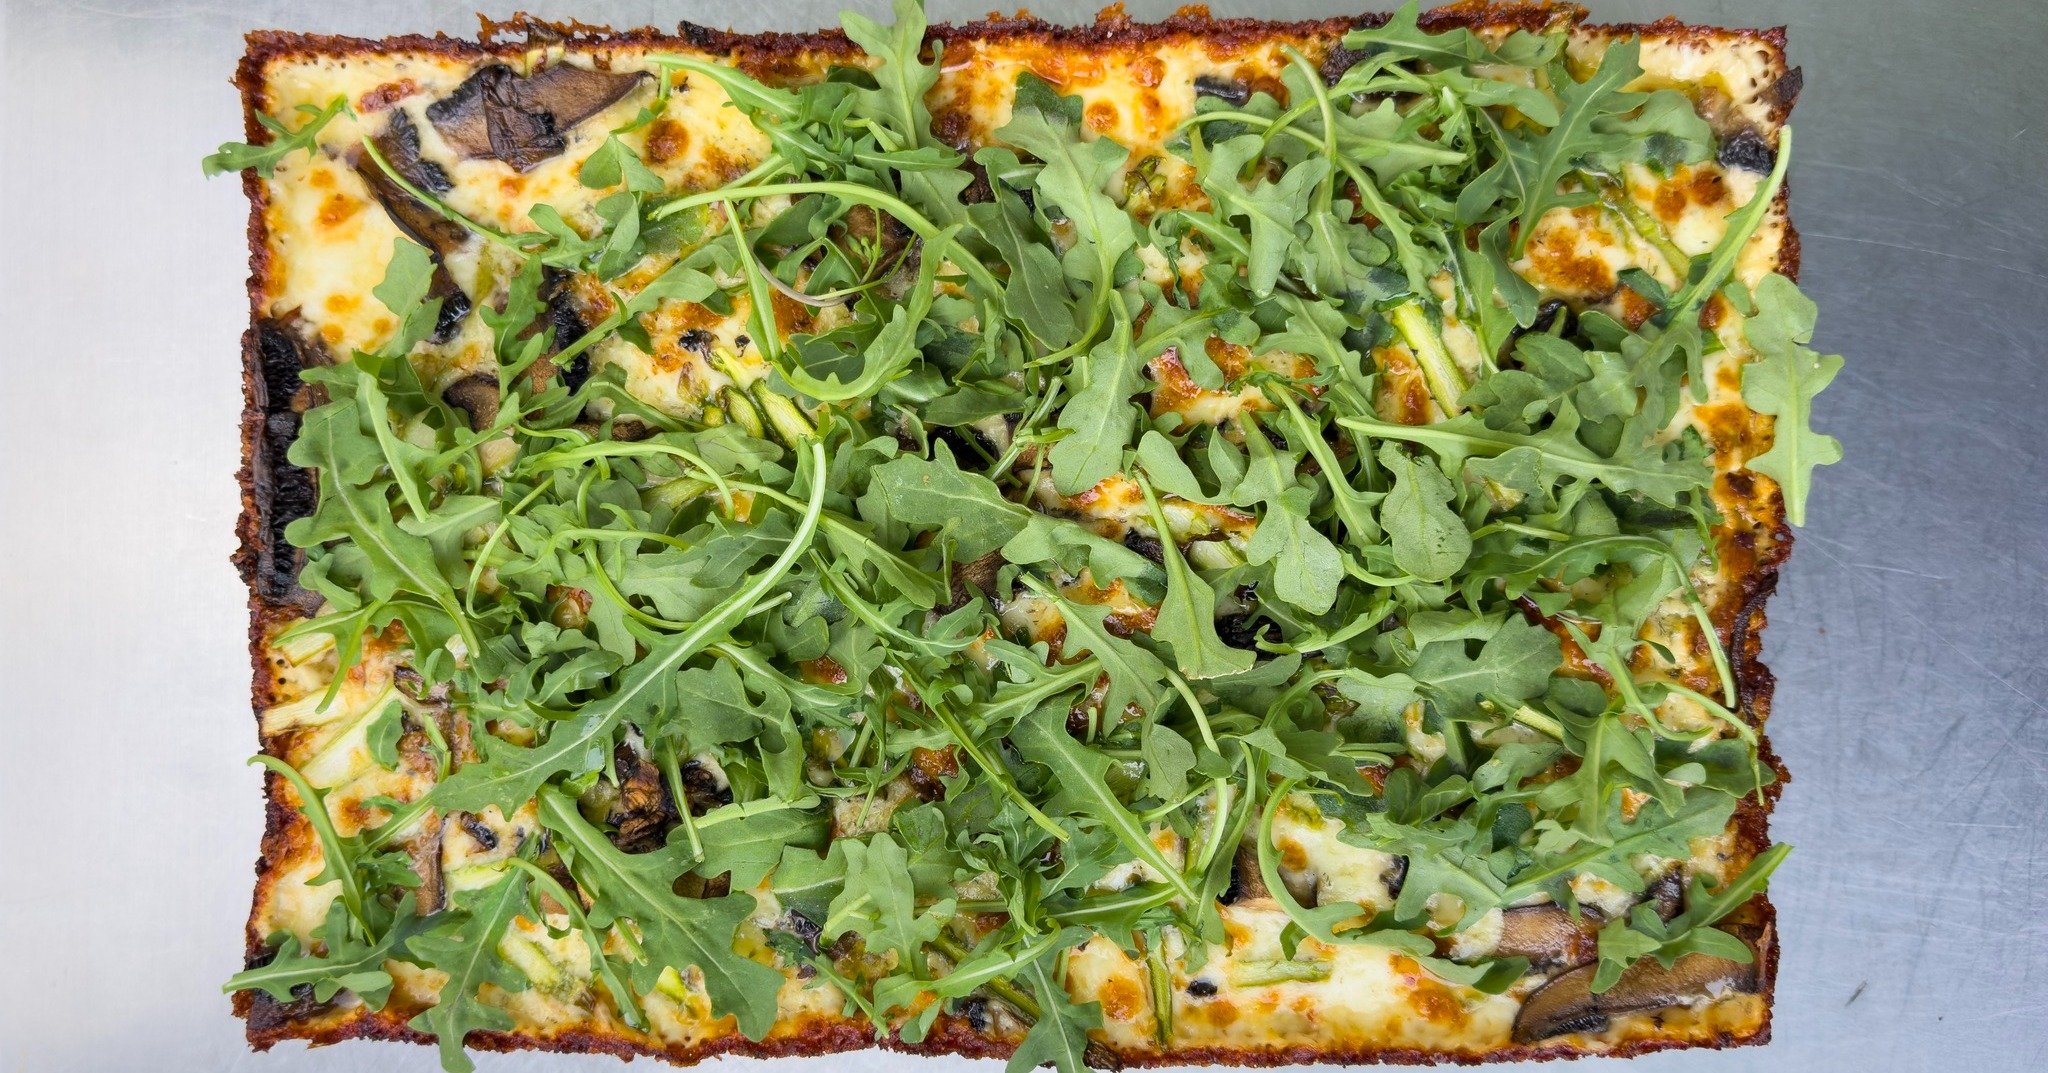 Love long weekends? Love Pizza? What if we said you could have BOTH?! We&rsquo;ll be open all Memorial Day weekend 🔥 

1. 🍄Mushroom Magic Square Pie - A mystical blend of mushrooms, asparagus, and arugula.

2. 🩺The Cure Square Pie- Cured meats gal